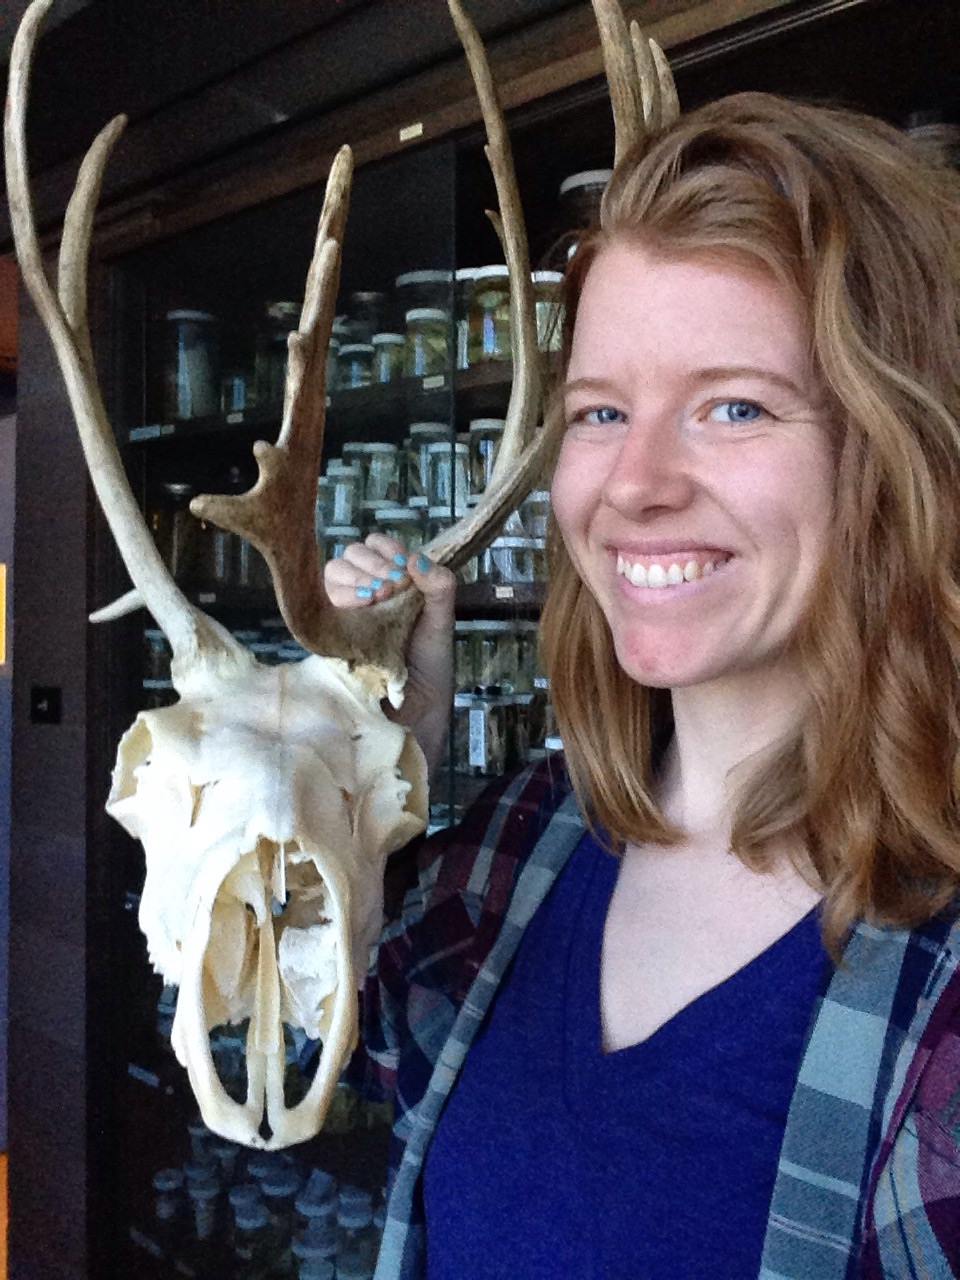 Me, a woman with red hair and blue eyes, excitedly holding a caribou skull in museum collections